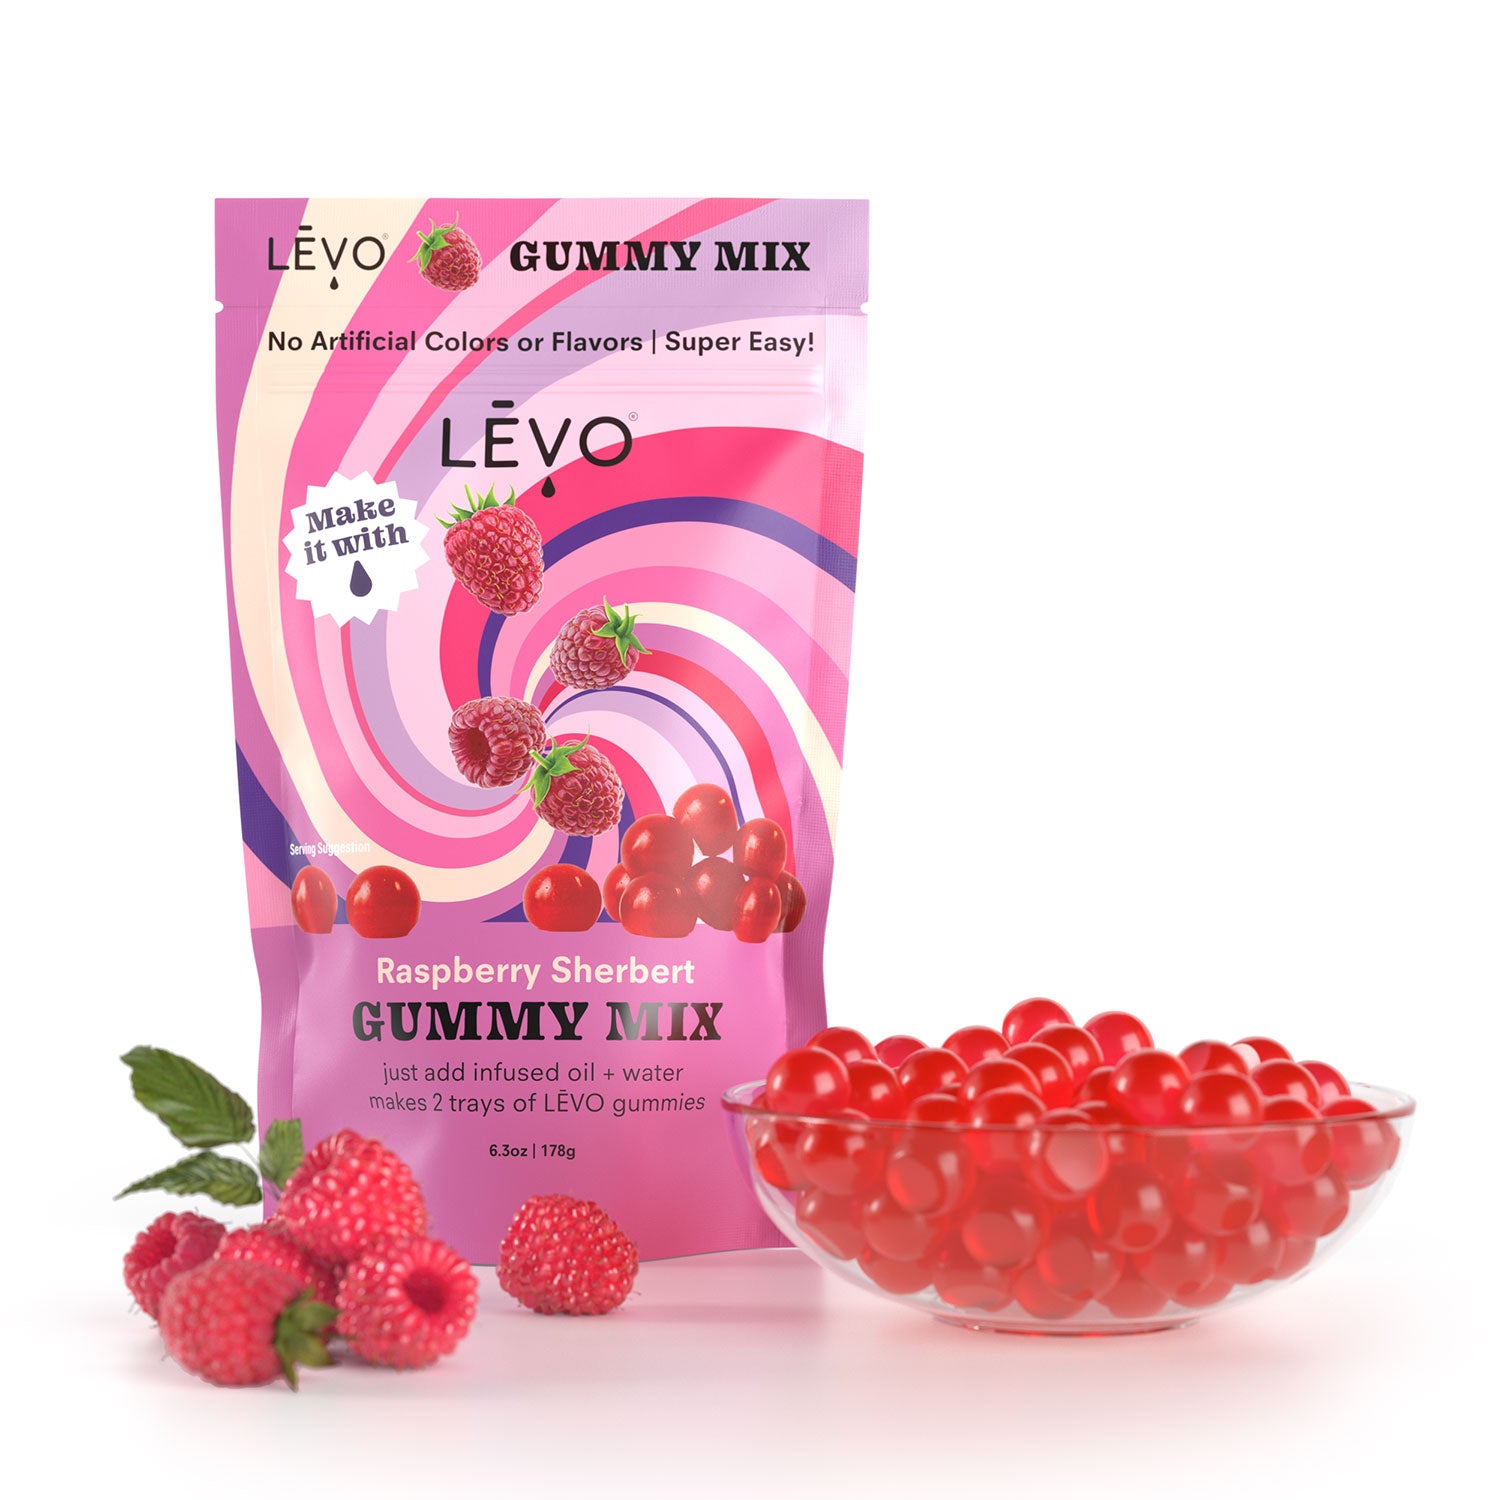 Raspberry Sherbert gummy mix, made with all natural colors and flavors. Make your own dosed edible gummies at home, and save 10x the cost of buying pre-made. LEVO pays for itself compared to buying tinctures and gummies at the store.